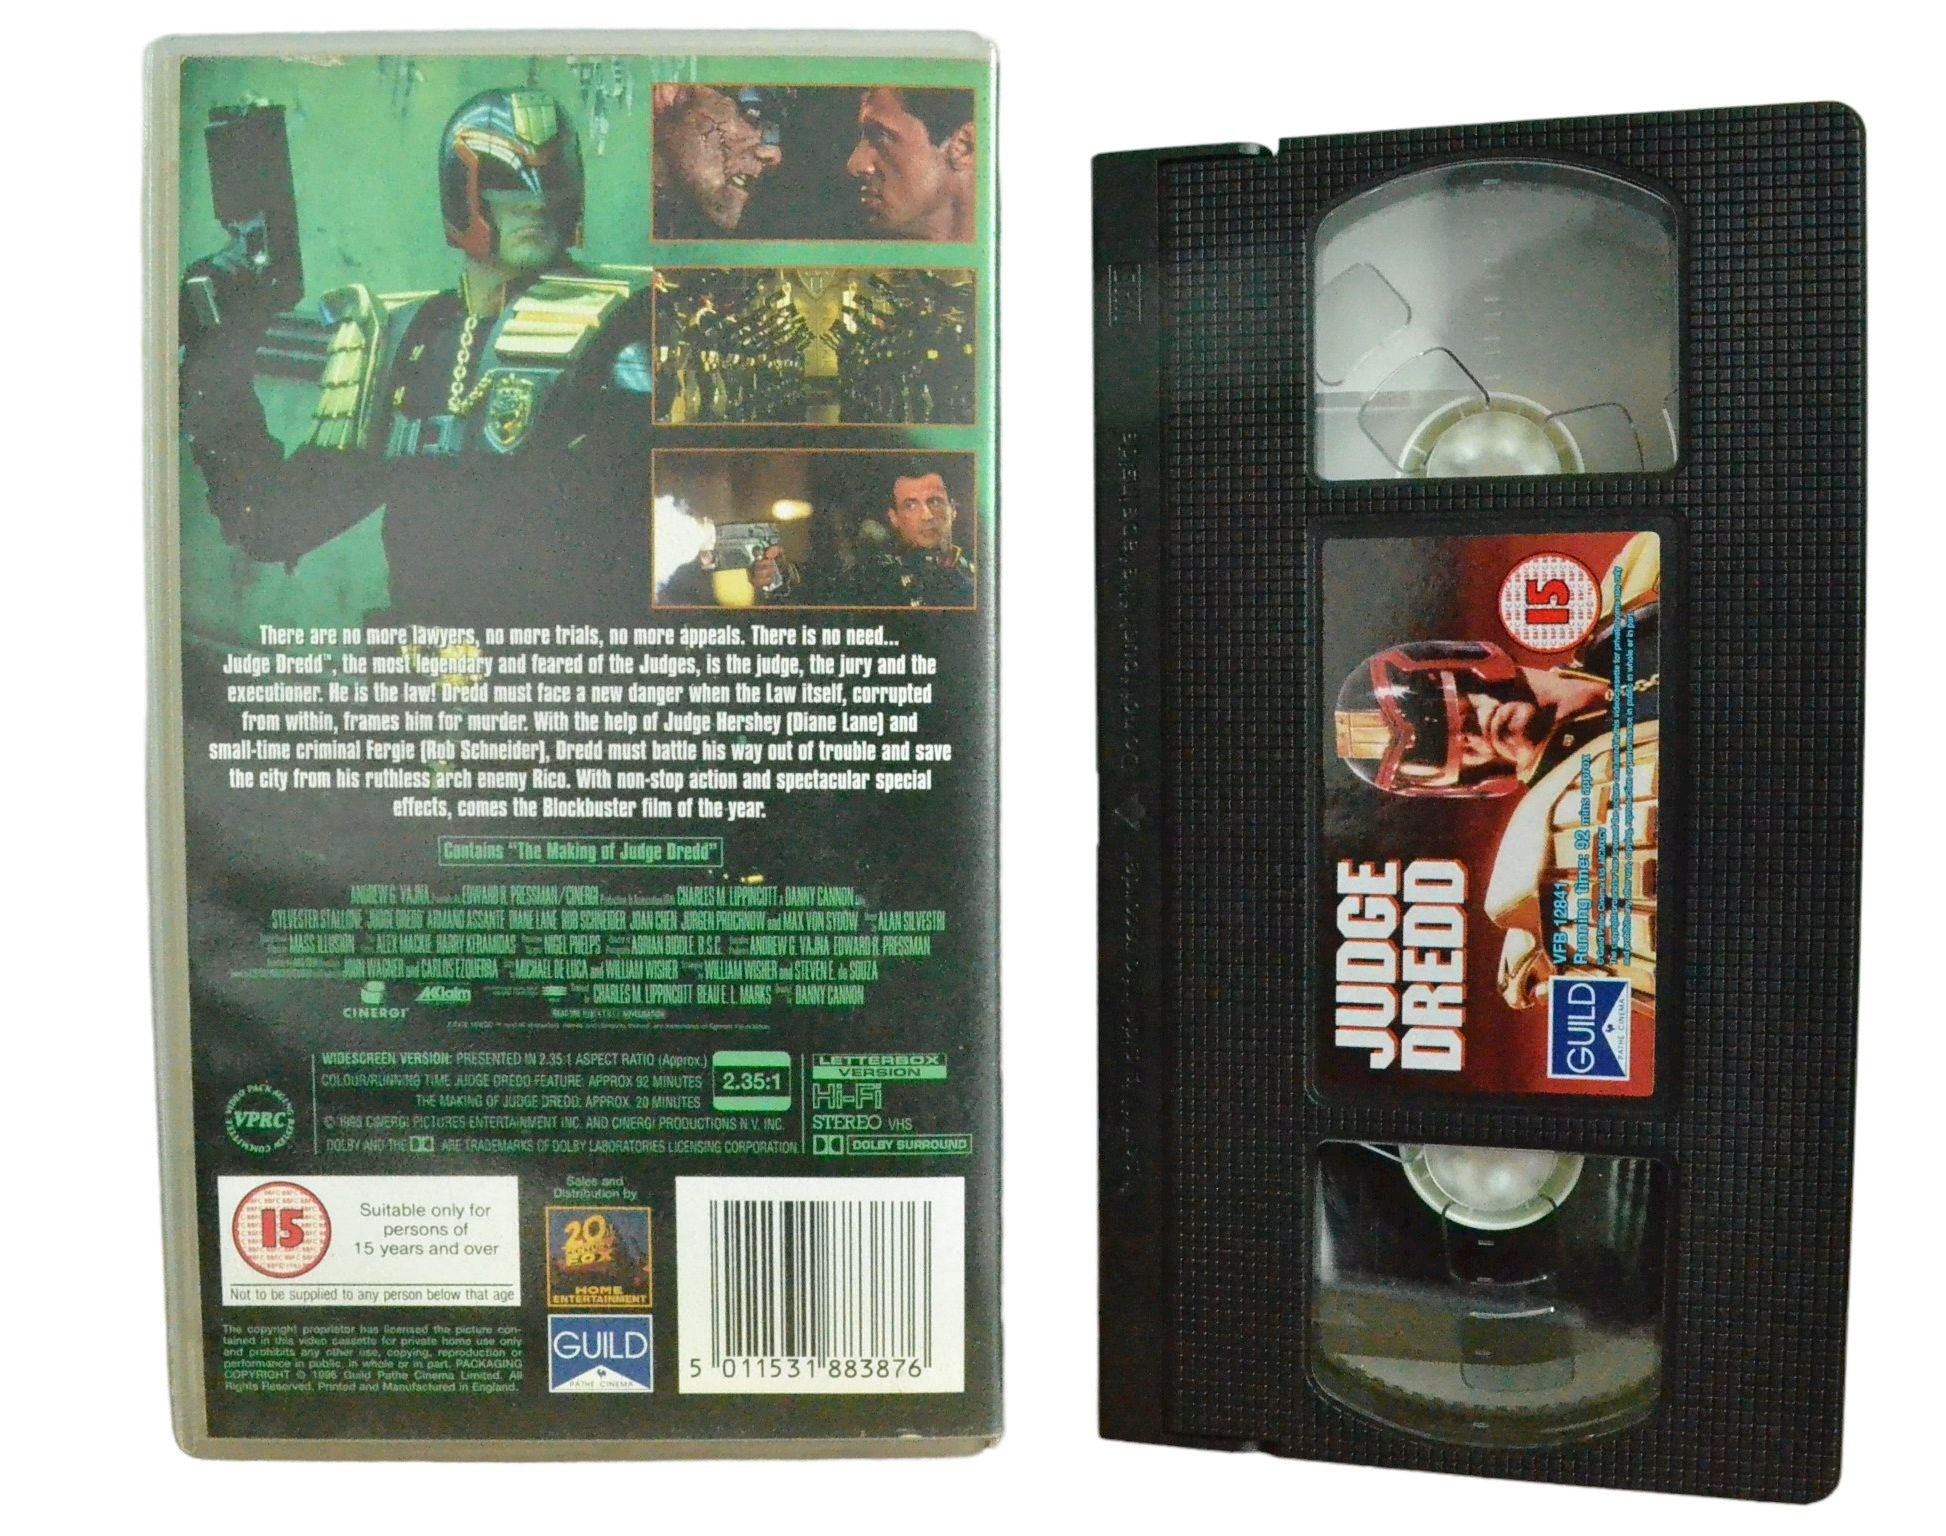 Judge Dredd (Widescreen Special Edition) - Sylvester Stallone - 20th Century Fox Home Entertainment - Vintage - Pal VHS-